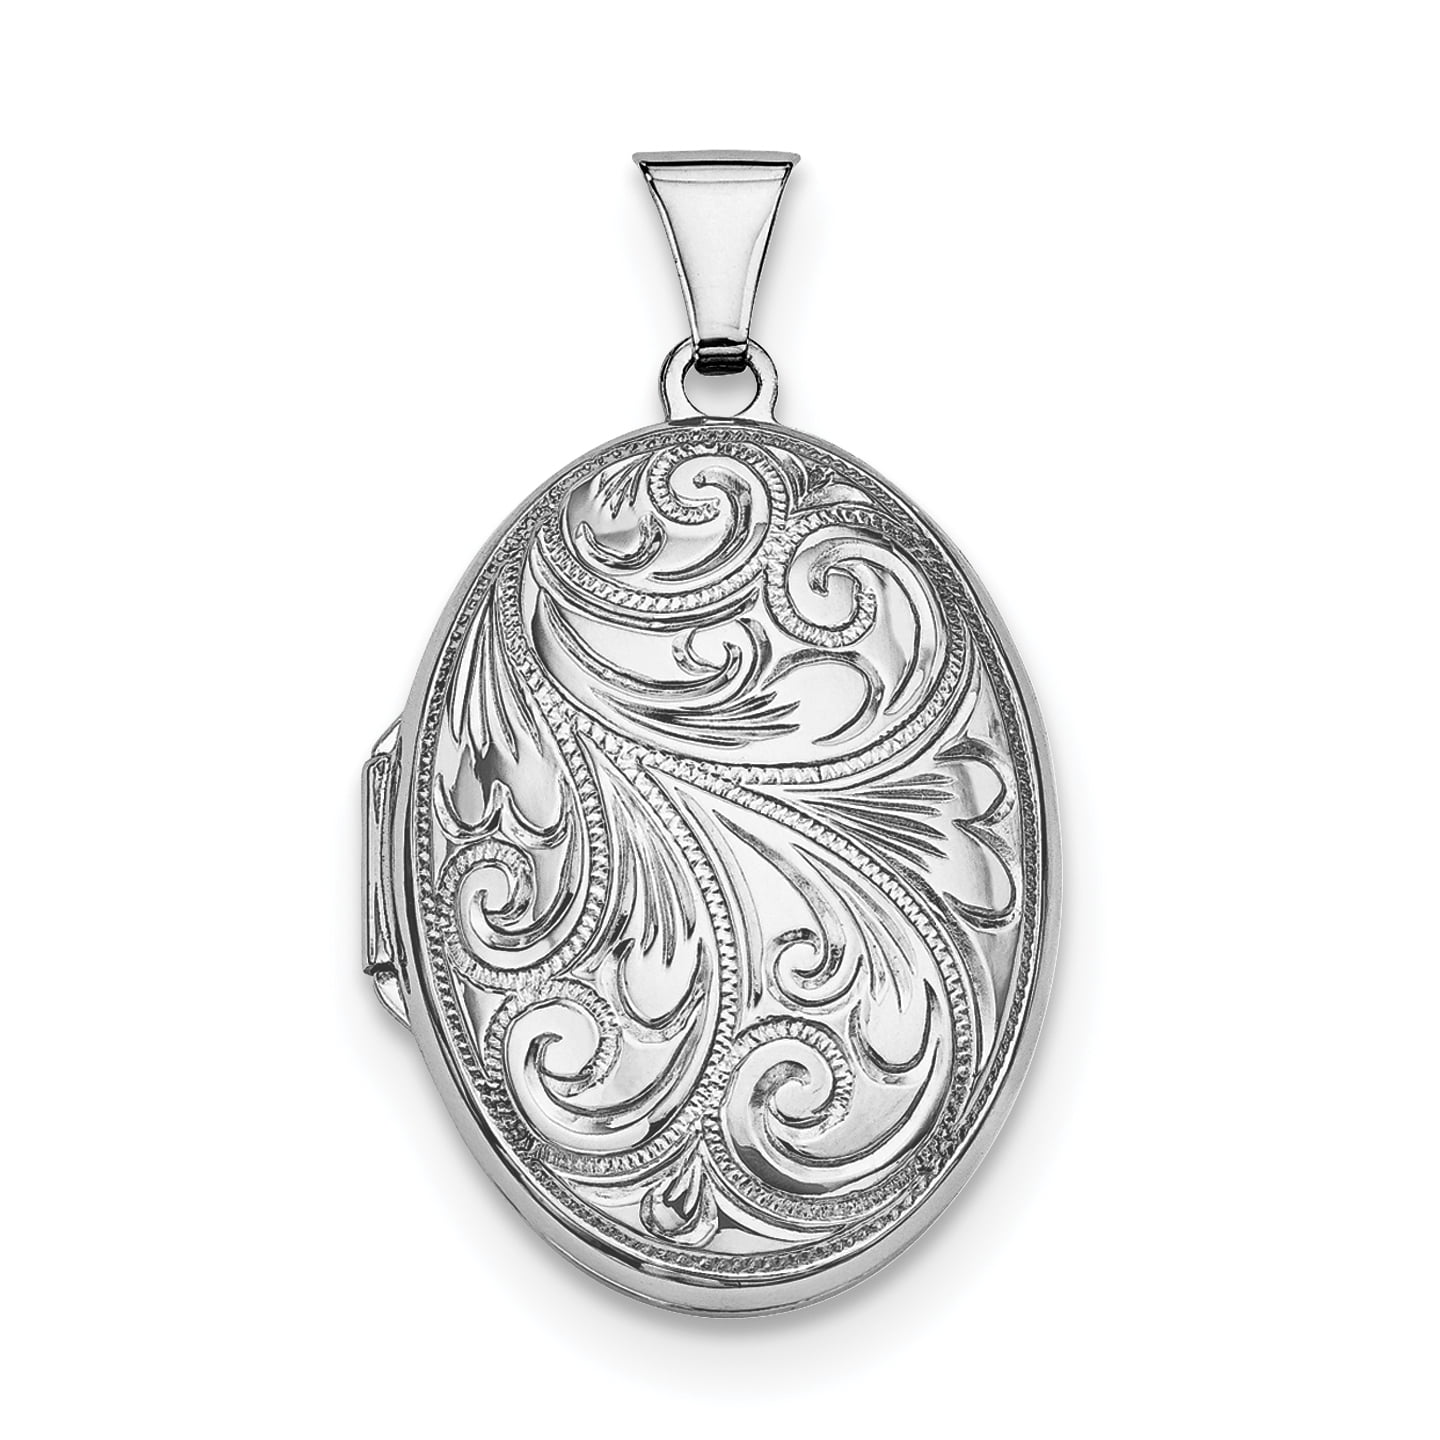 925 Sterling Silver Oval Photo Pendant Charm Locket Chain Necklace That Holds Pictures Fine Jewelry Gifts For Women For Her